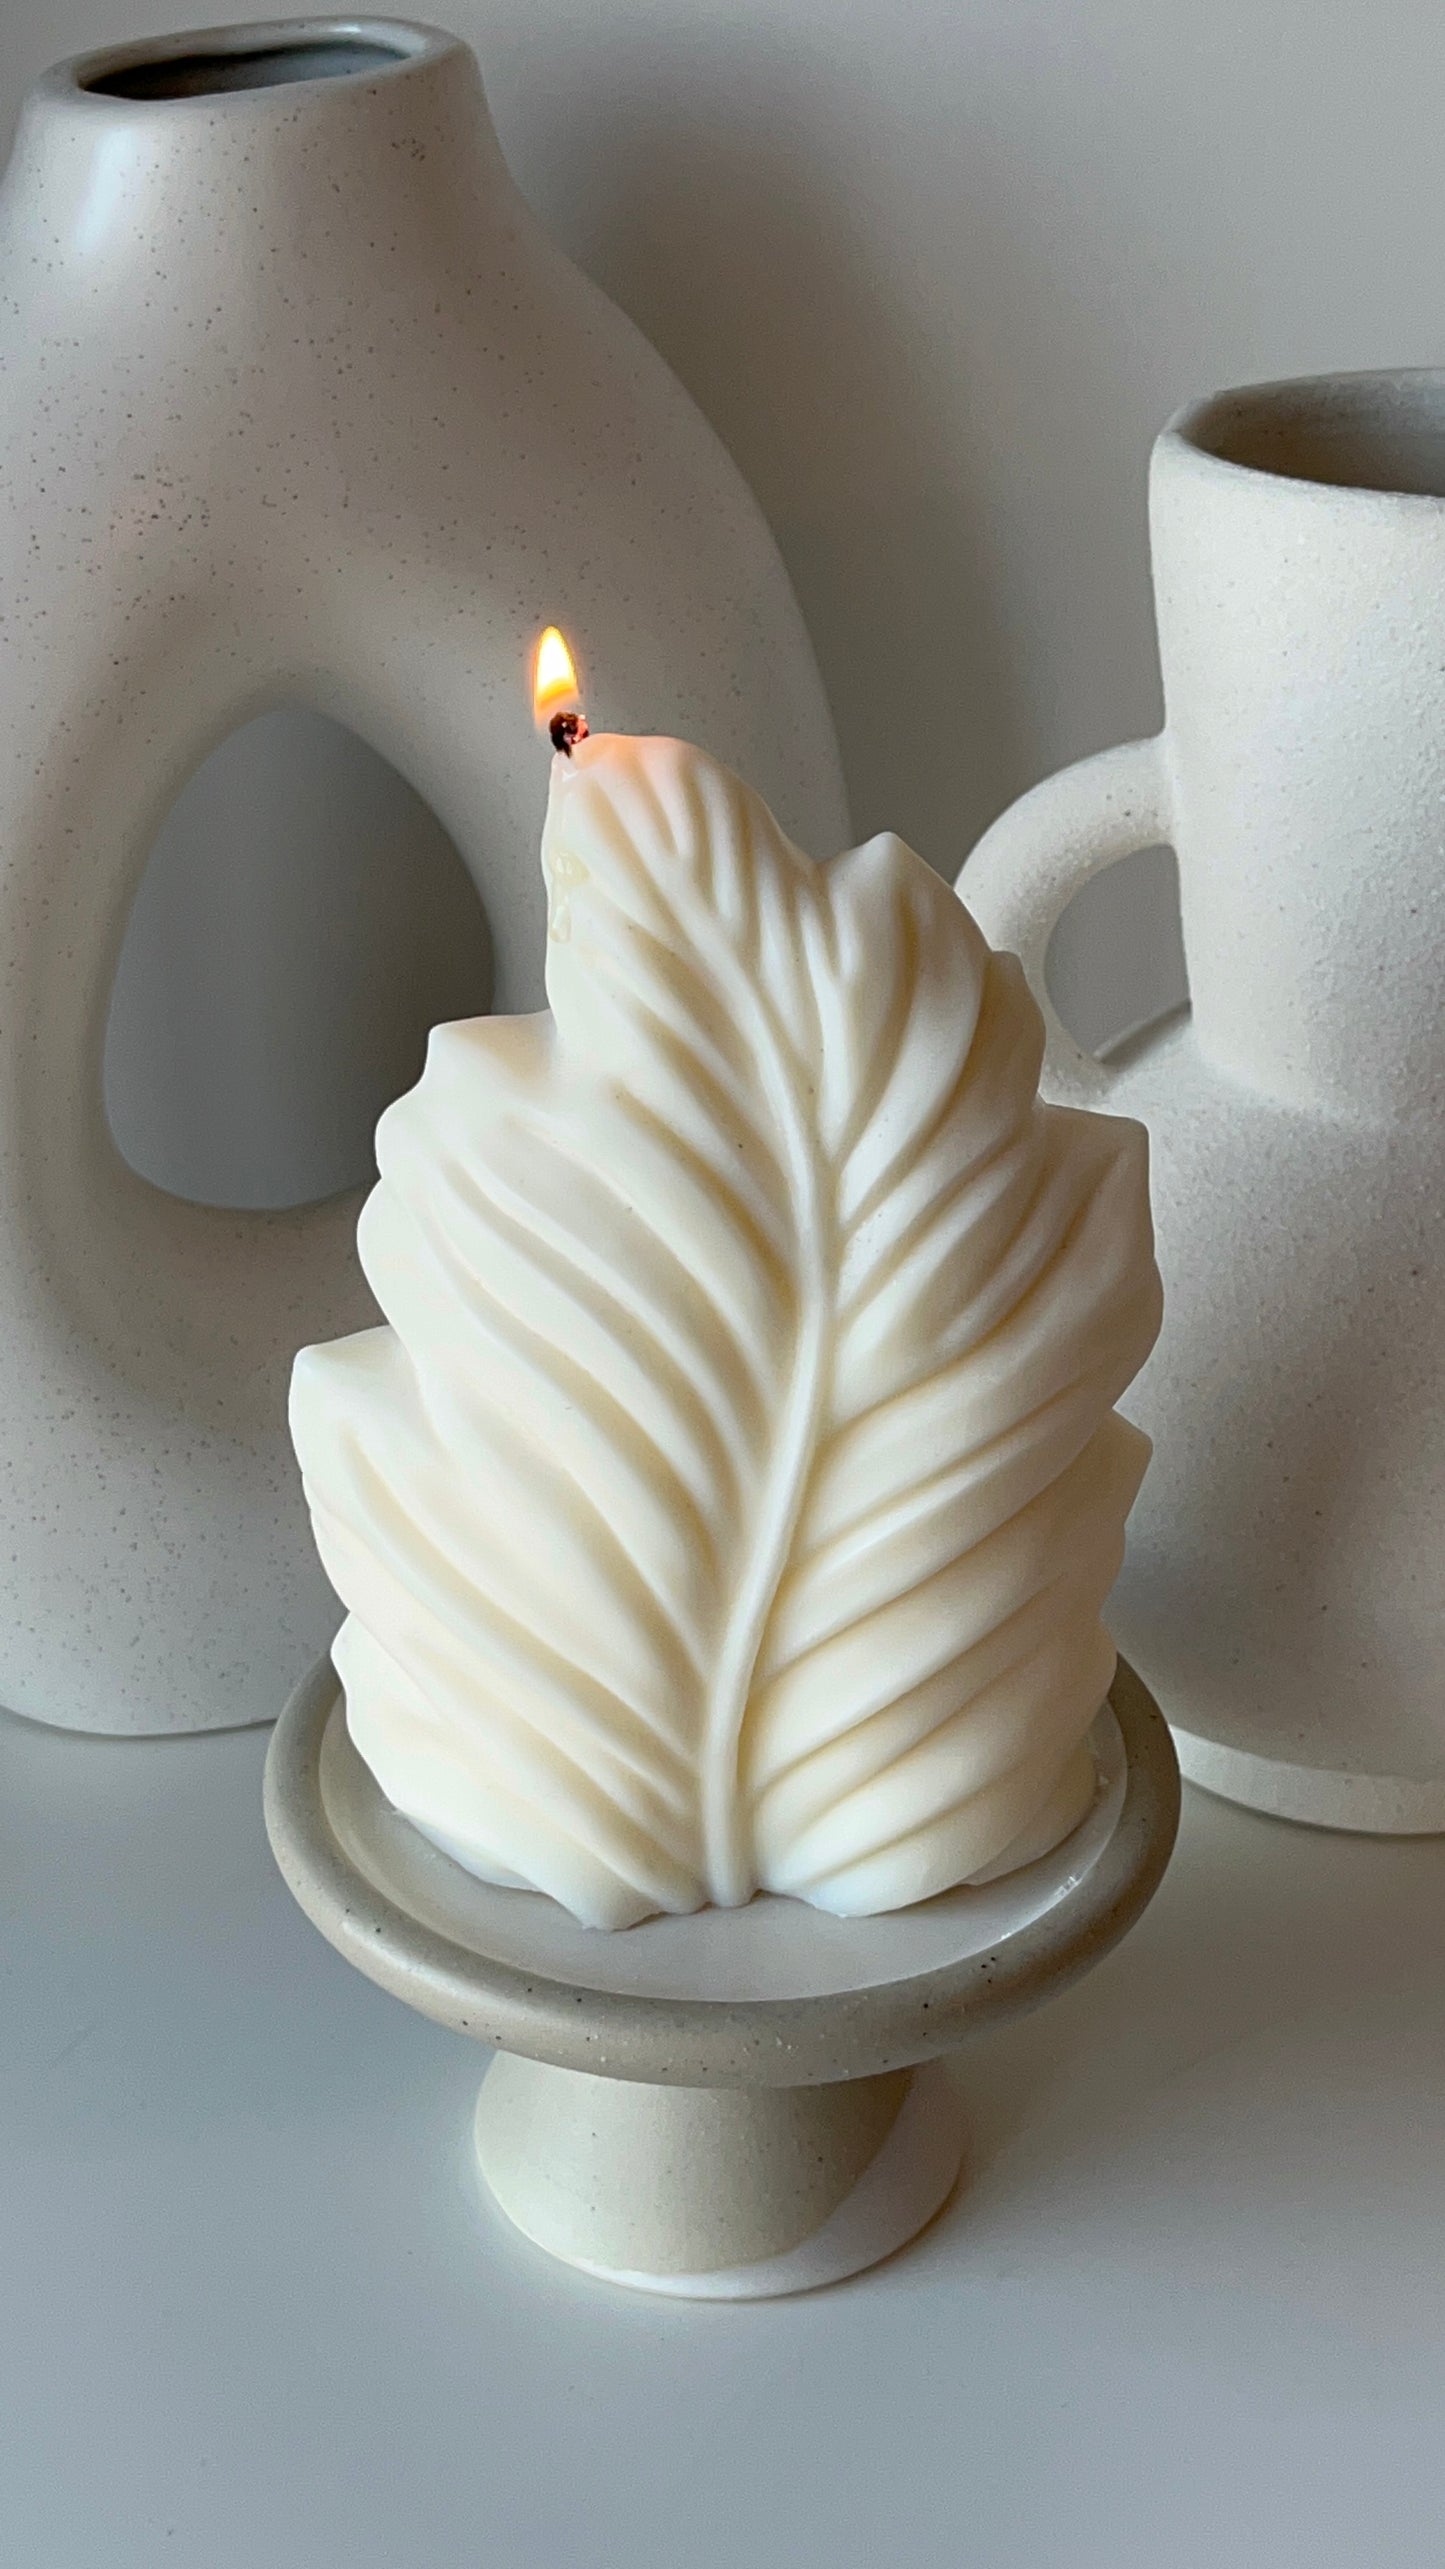 The Leaf Candle